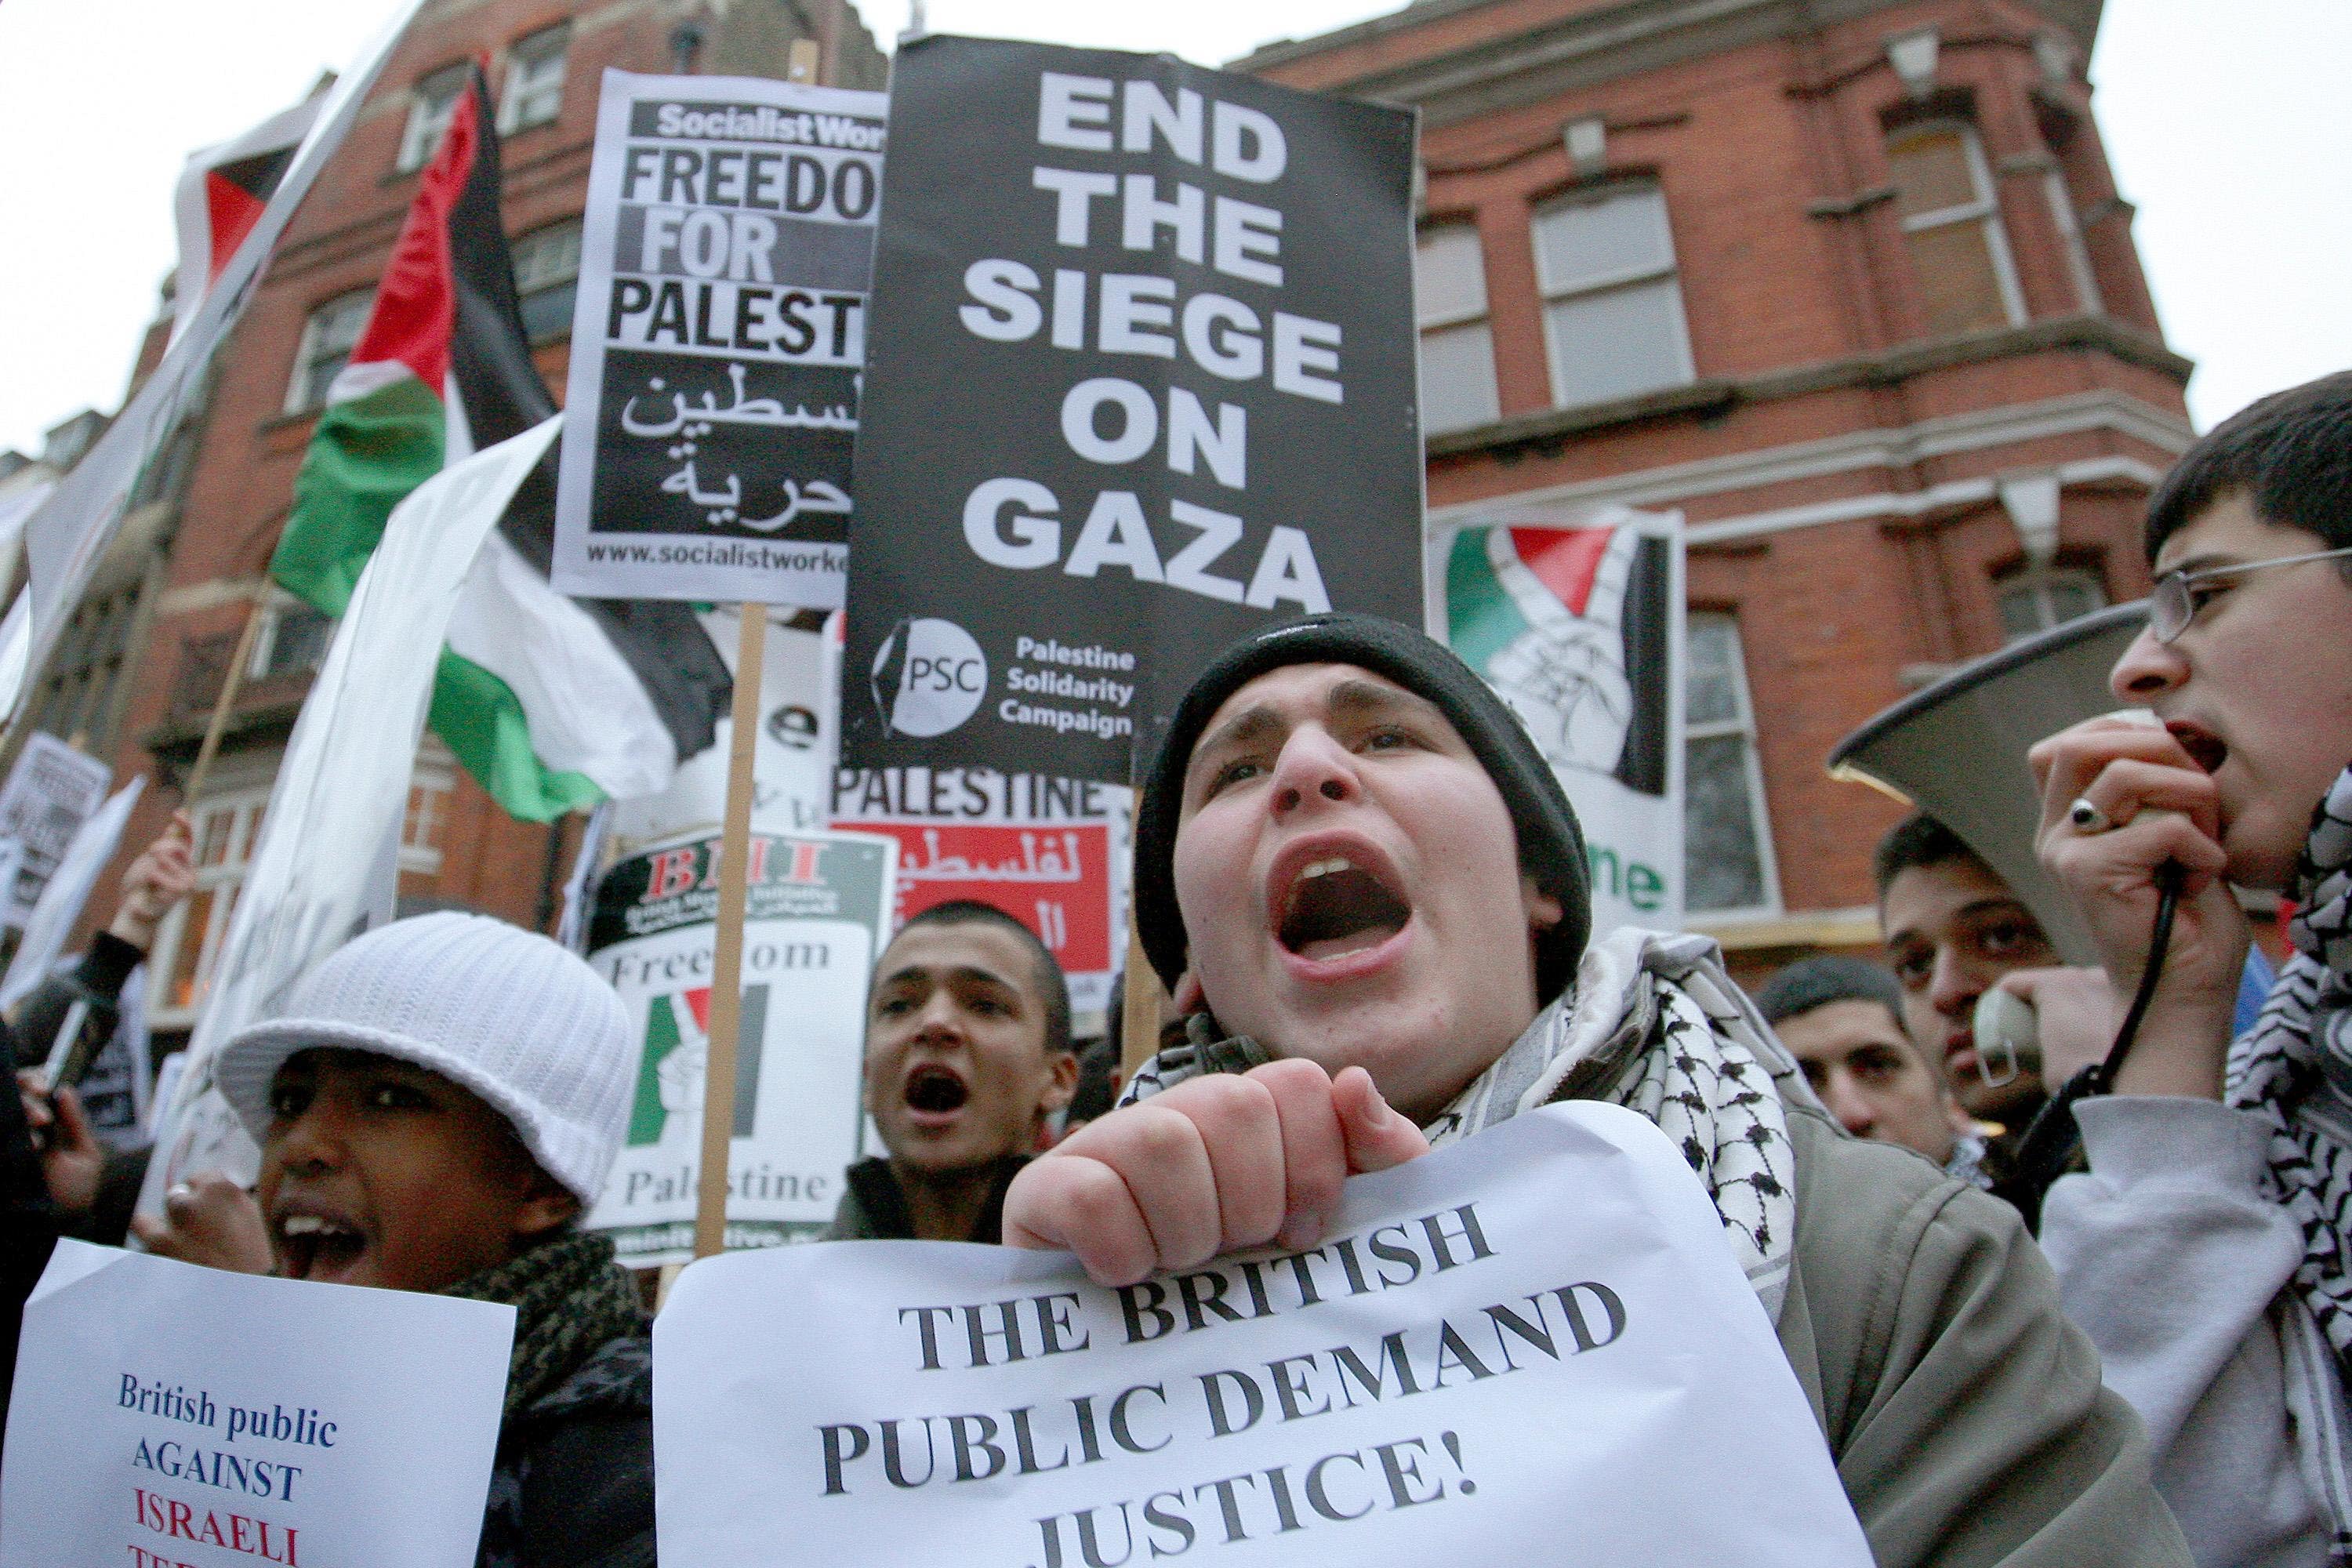 Pro-Palestine protests were held in London and across the UK over the weekend